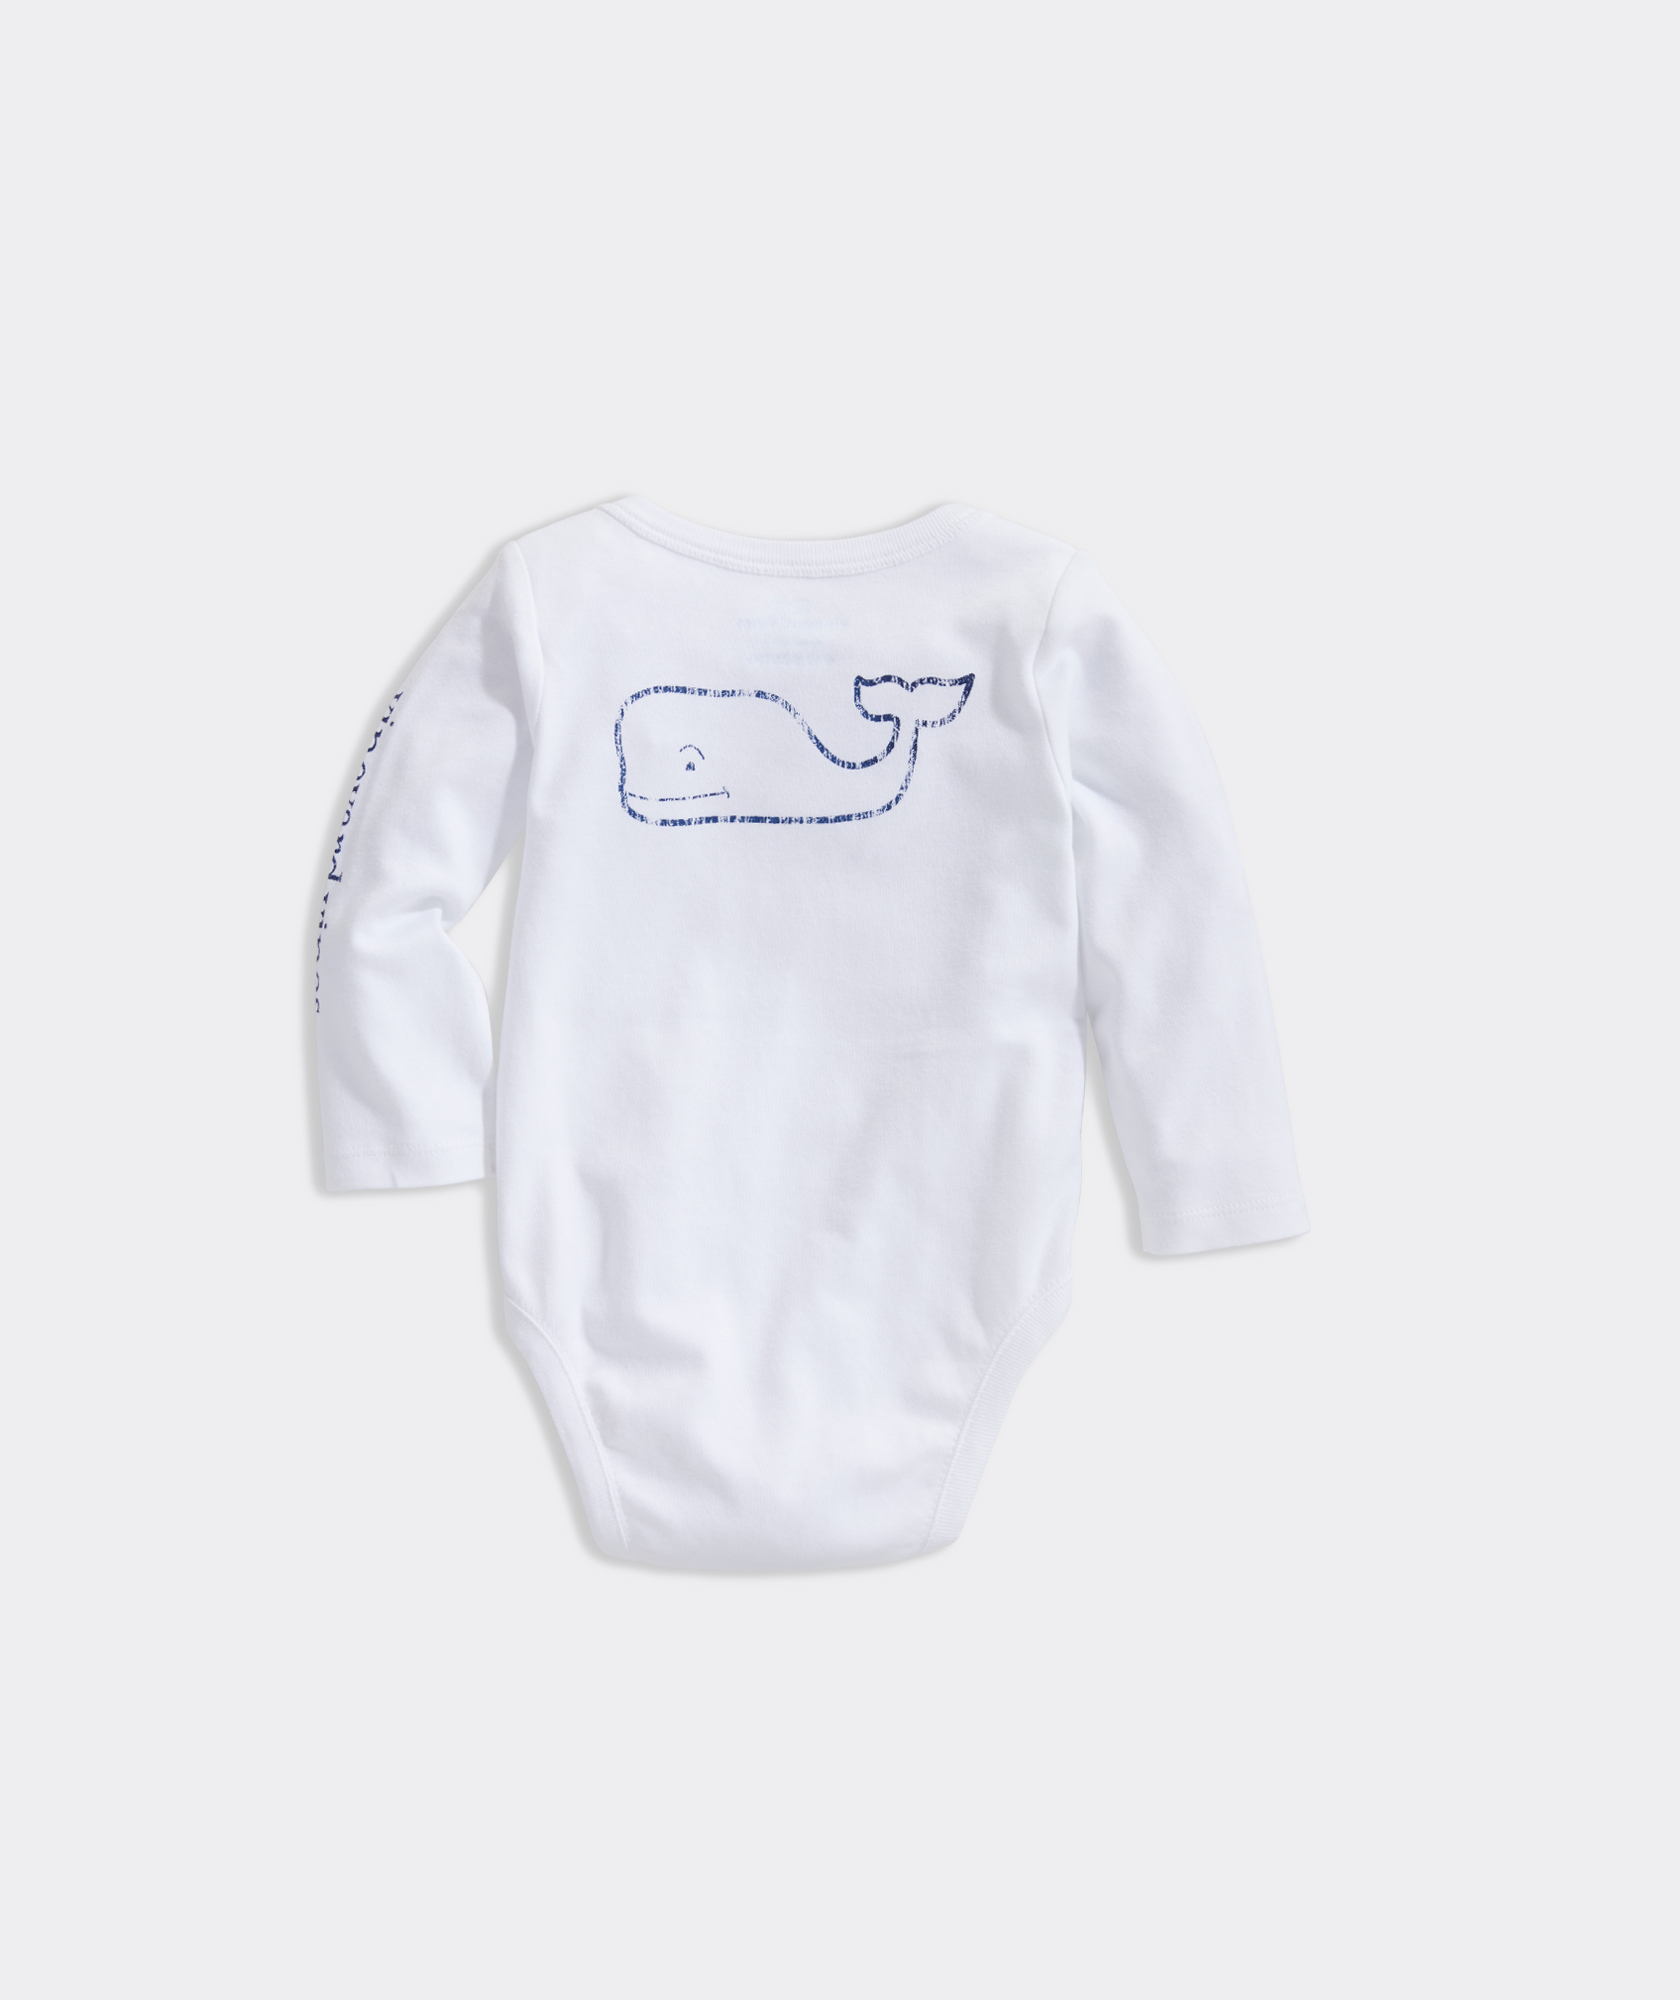 Baby Long-Sleeve Vintage Whale Suit at vines